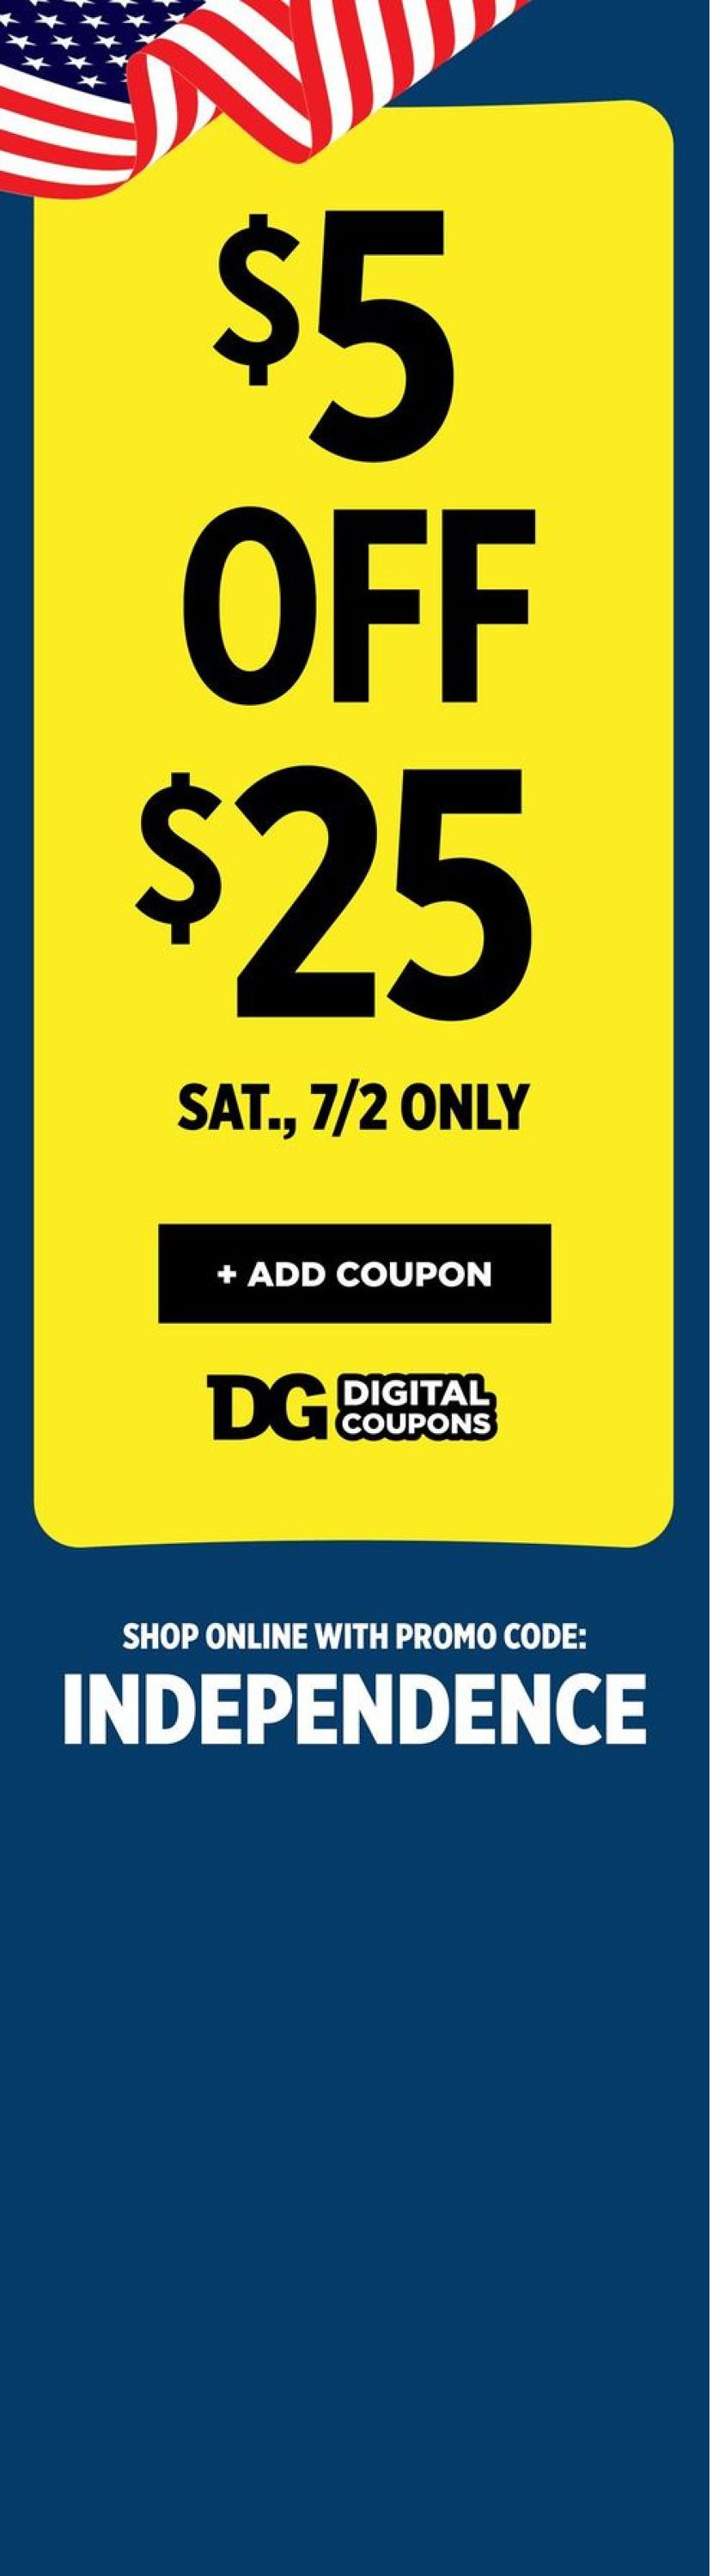 Catalogue Dollar General - 4th of July Sale  from 06/26/2022